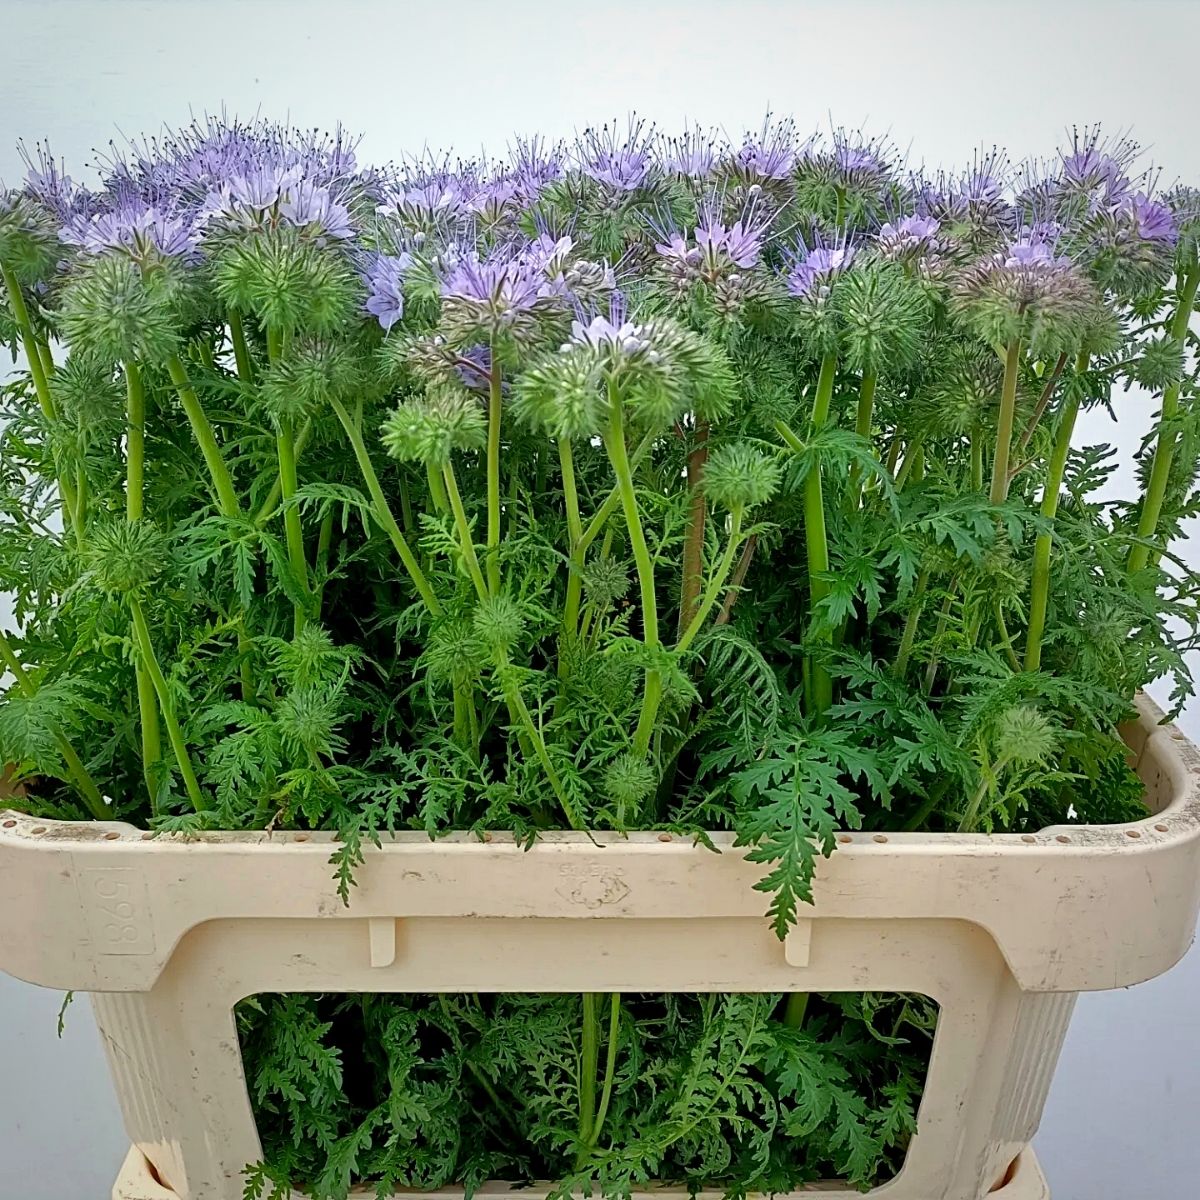 Phacelia Is the Precious Possession of Grower Maurits Keppel